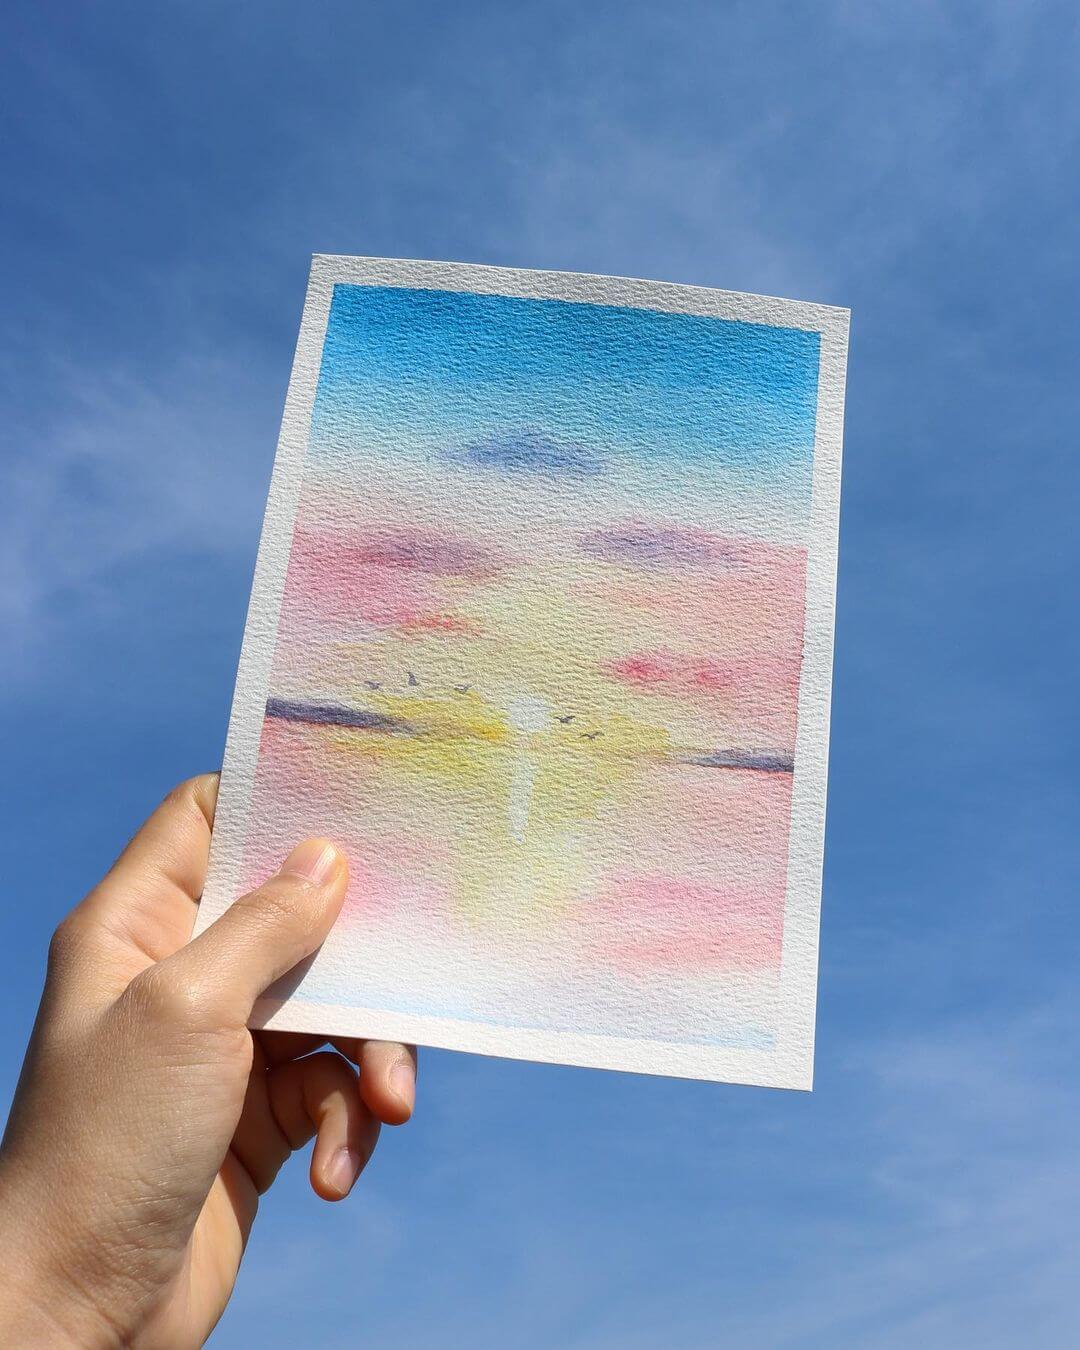 Hand holding up a sunset watercolour painting in the blue sky.